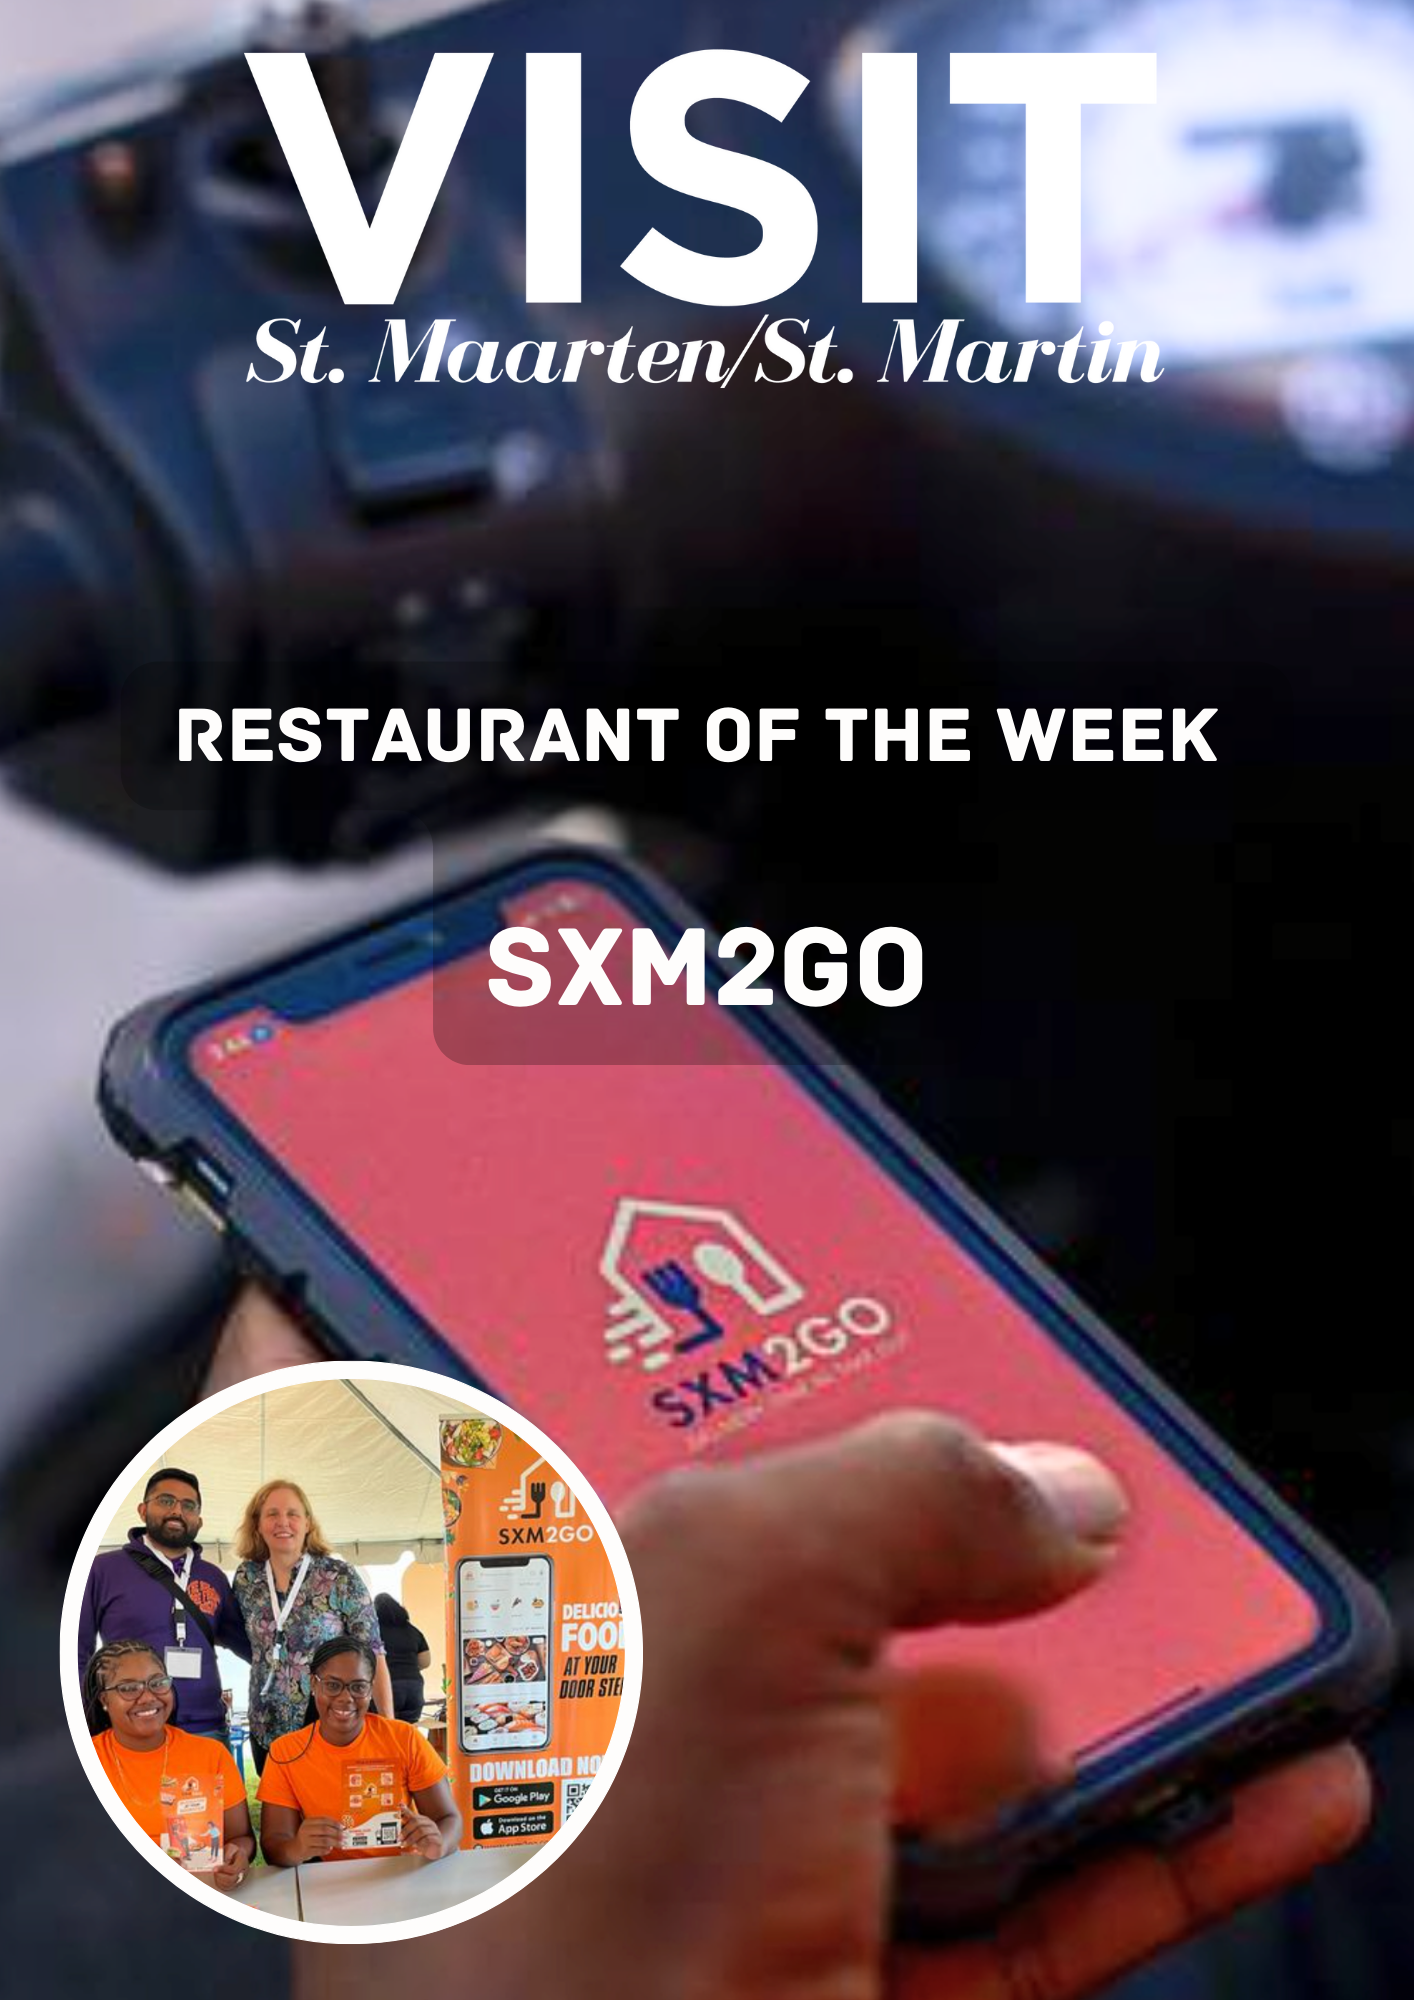 St Maarten restaurant of the week is SXM2GO which is a food delivery service on the Caribbean island